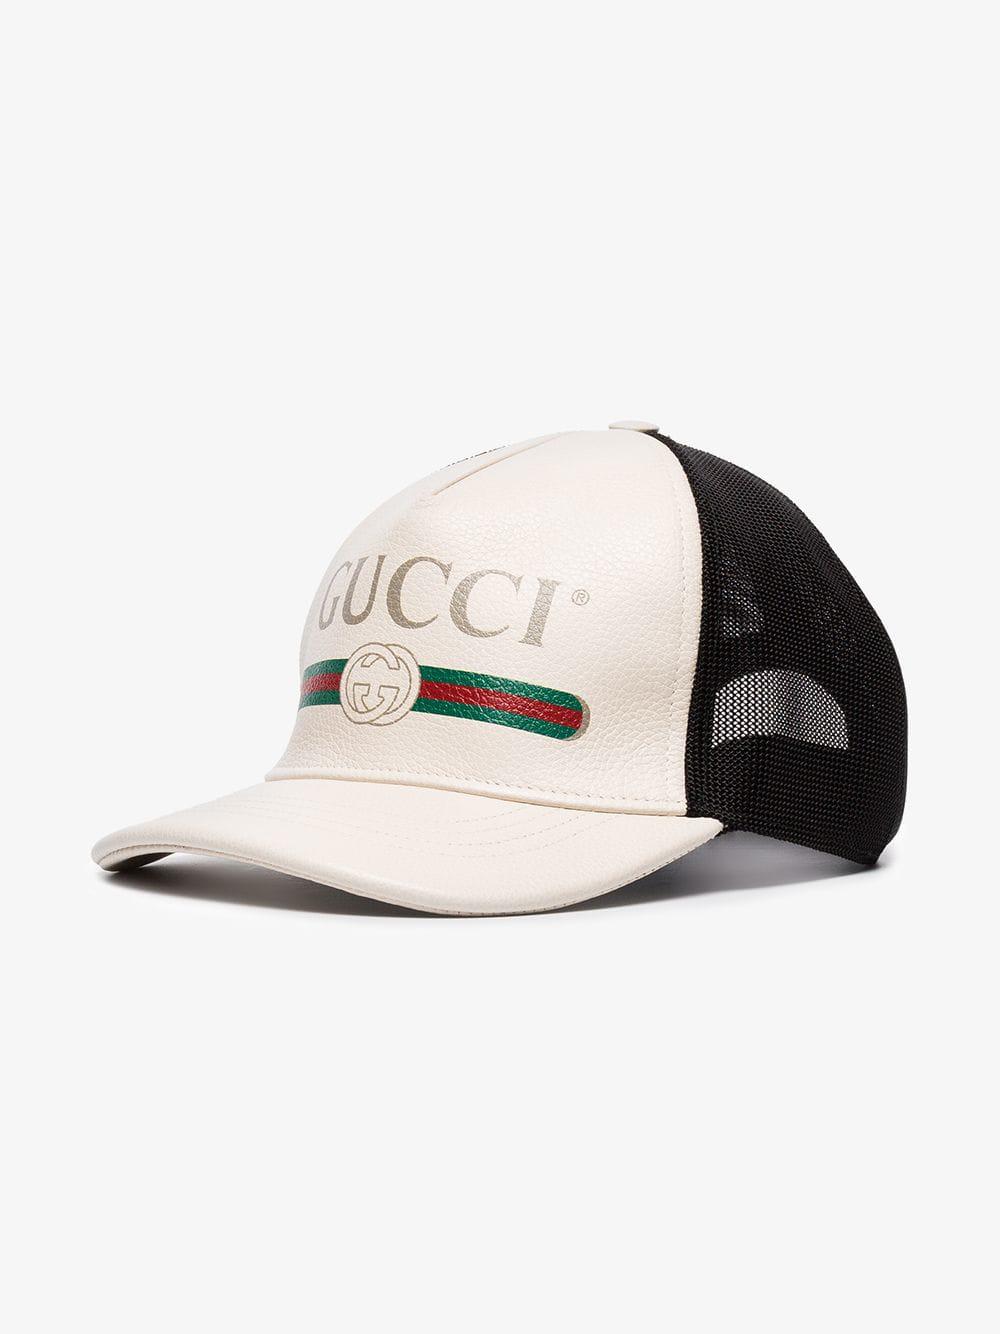 Gucci Print Leather Baseball Hat in White Leather (White) - Lyst